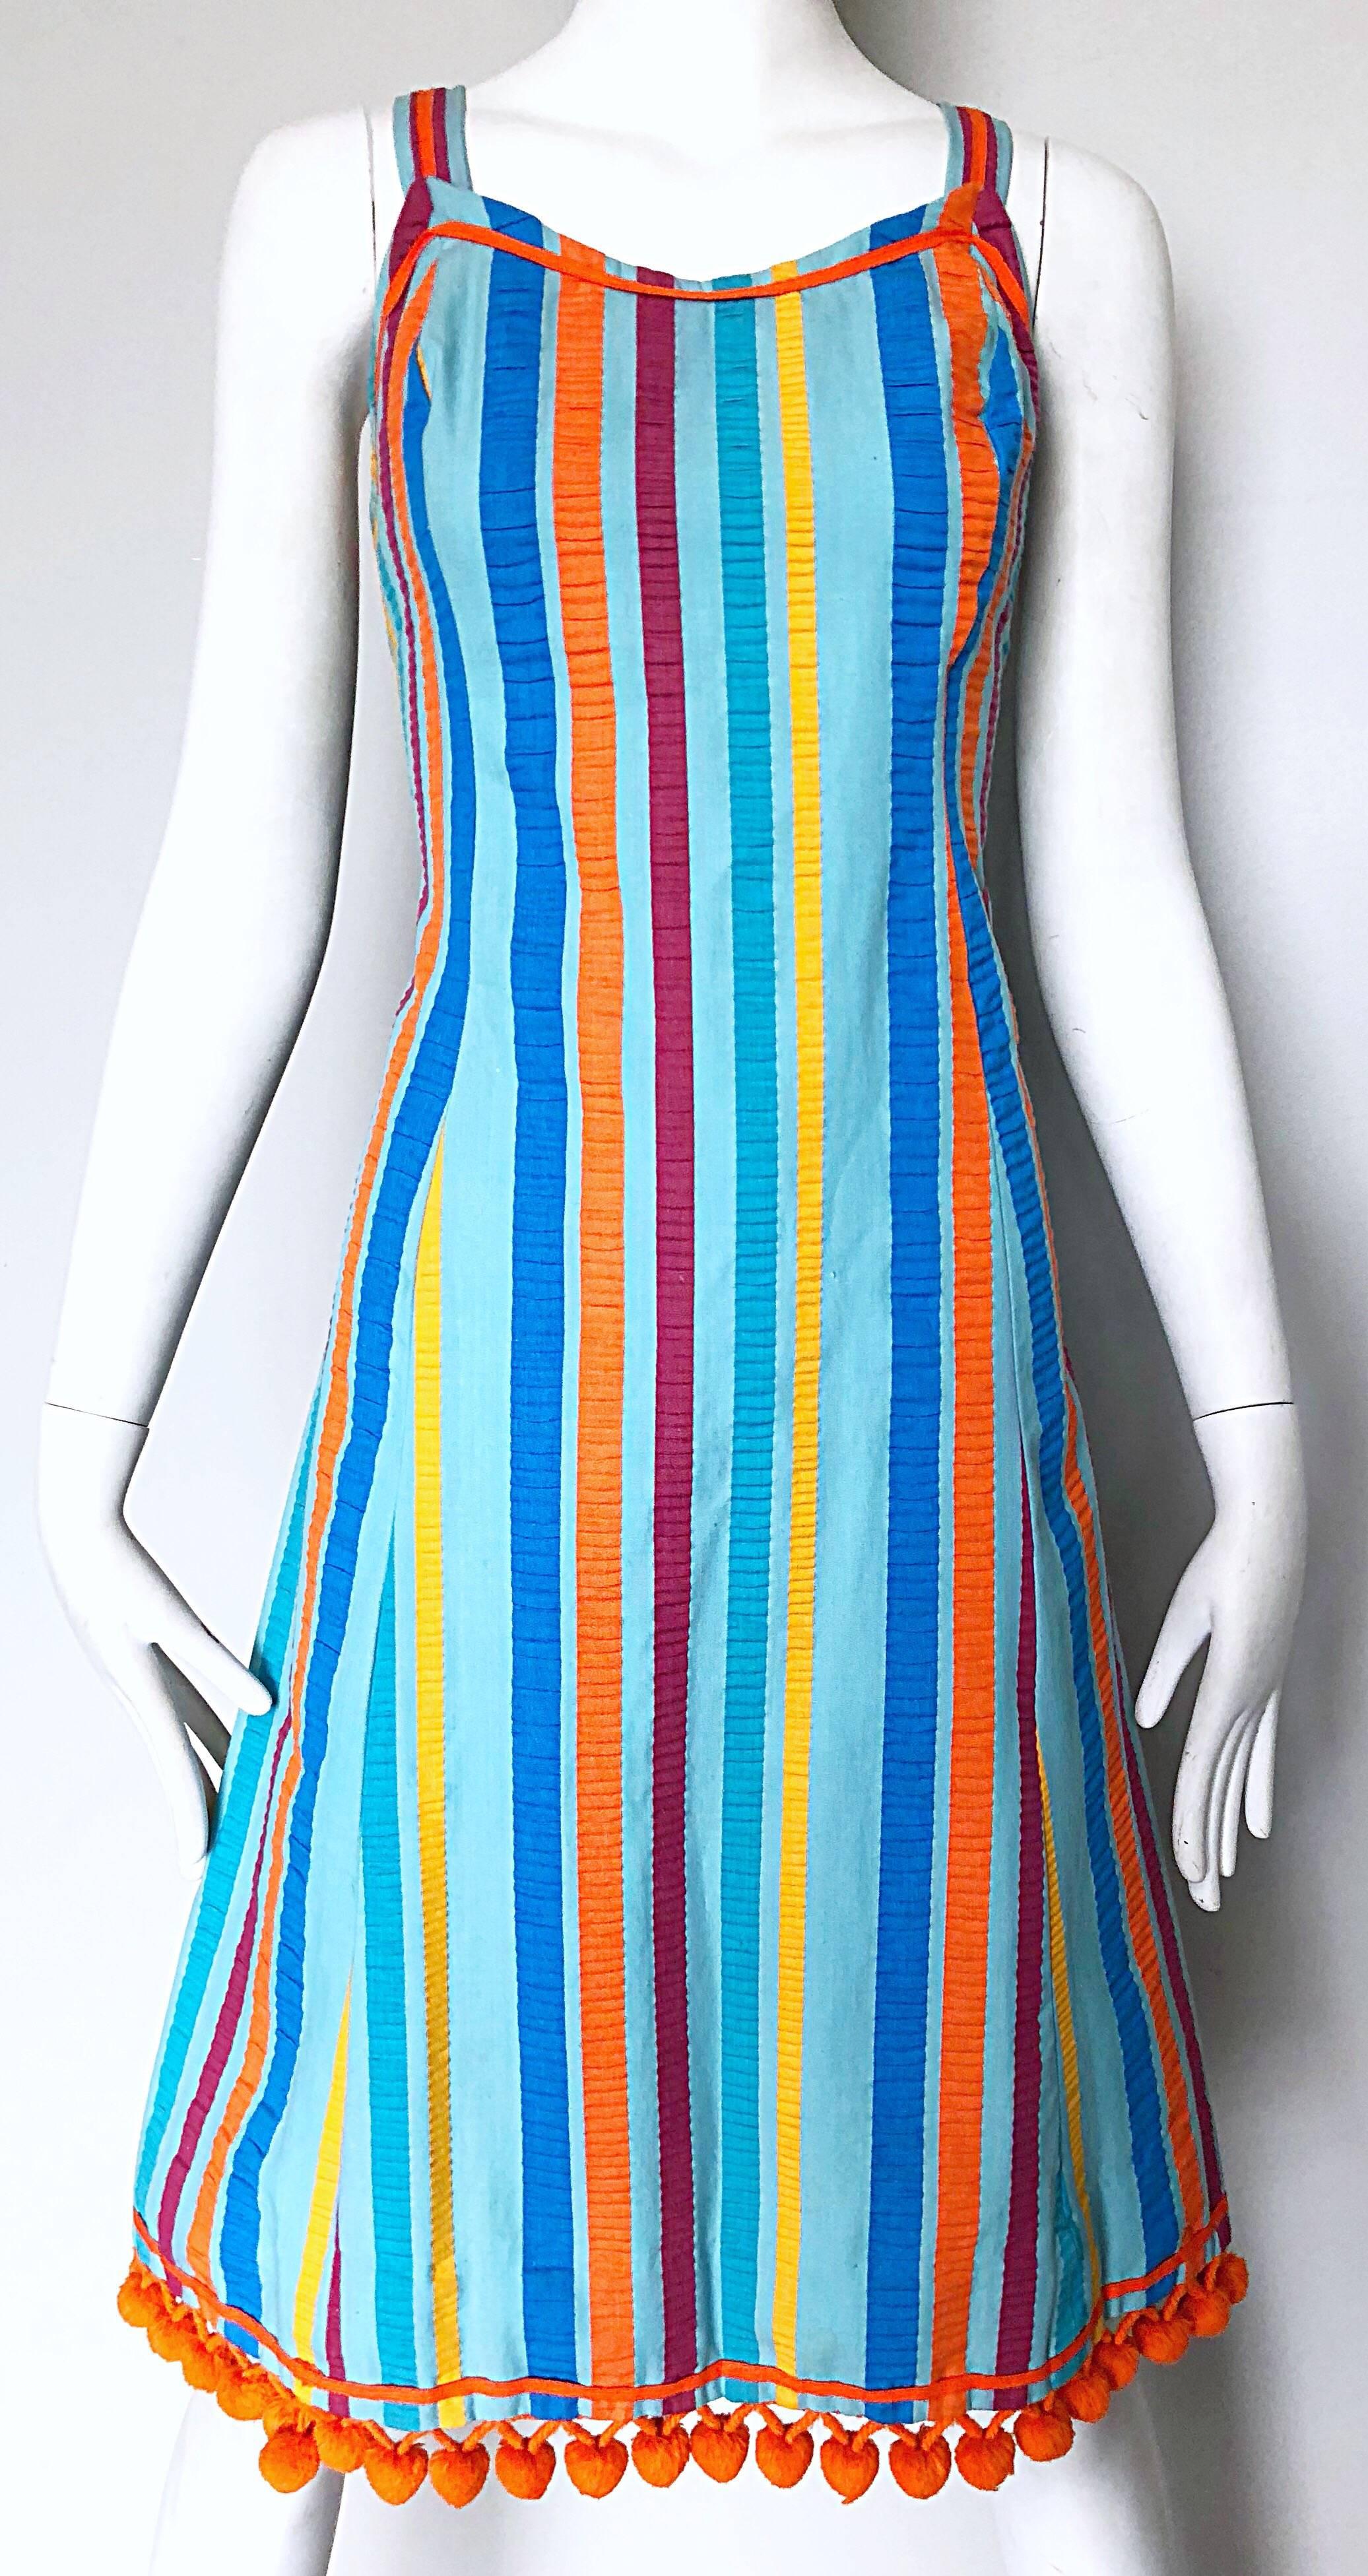 Gray Whimsical 1960s Toby Tanner Colorful Striped ' Pom Pom ' Cotton 60s A Line Dress